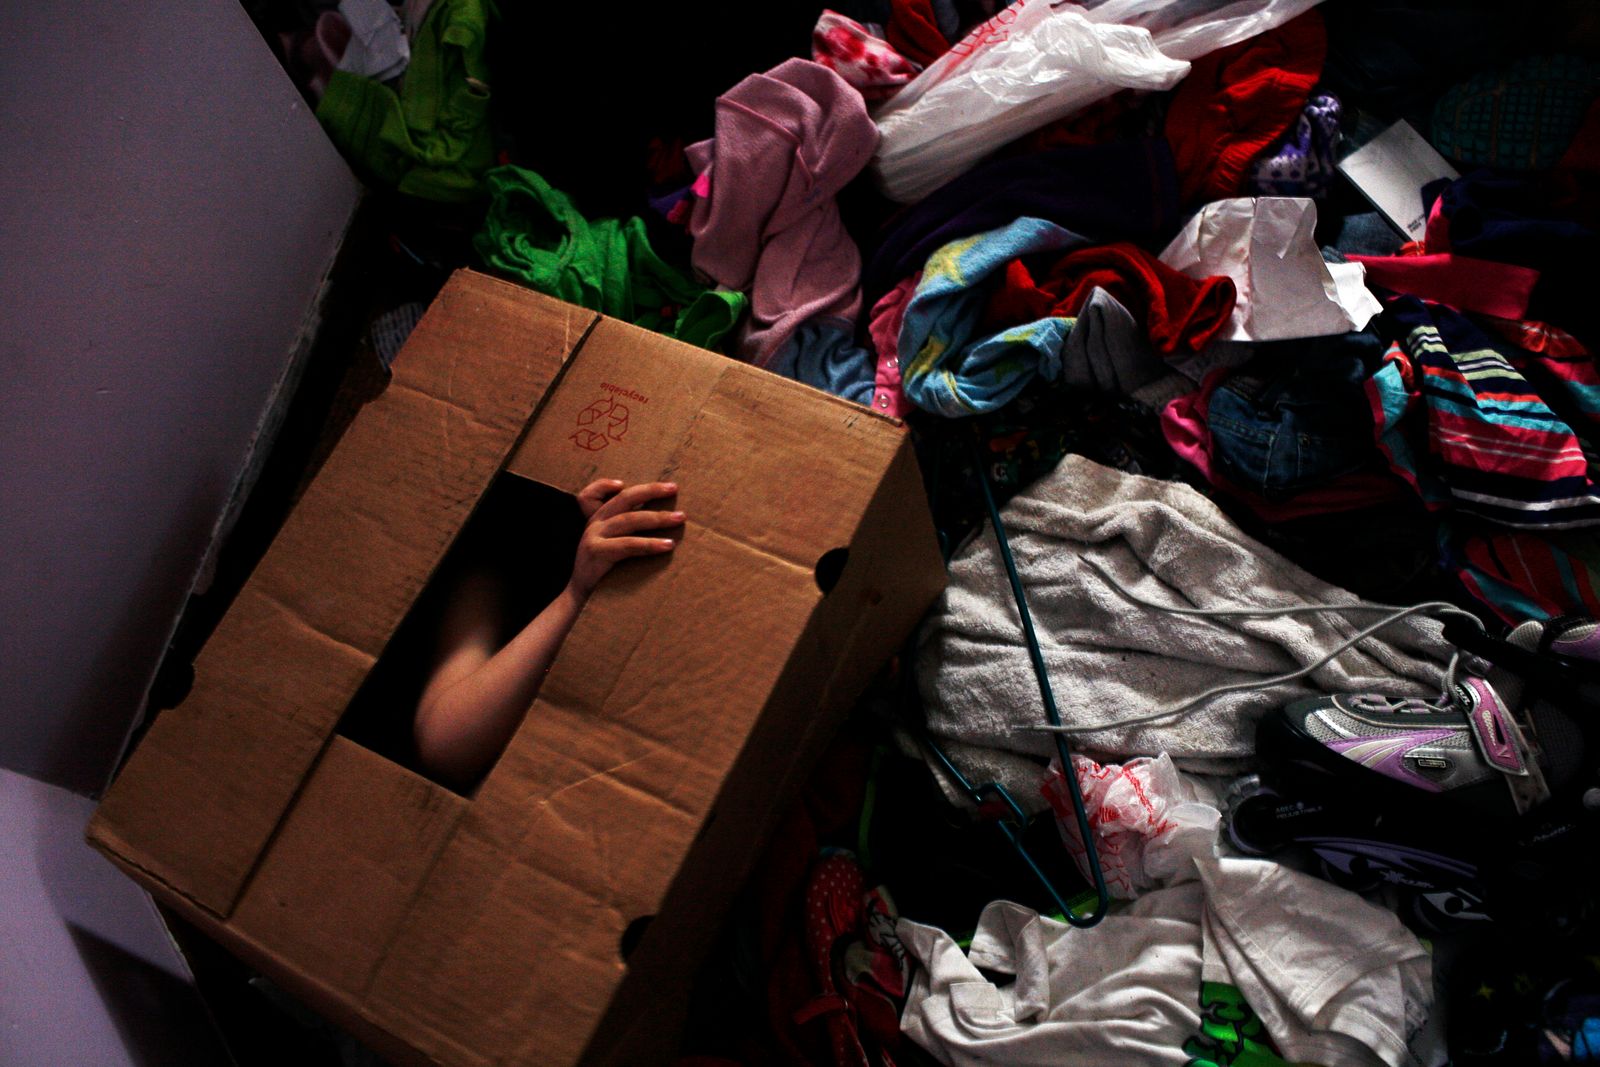 © Uno  Yi - David hides in a empty box during a game of hide-and-seek.